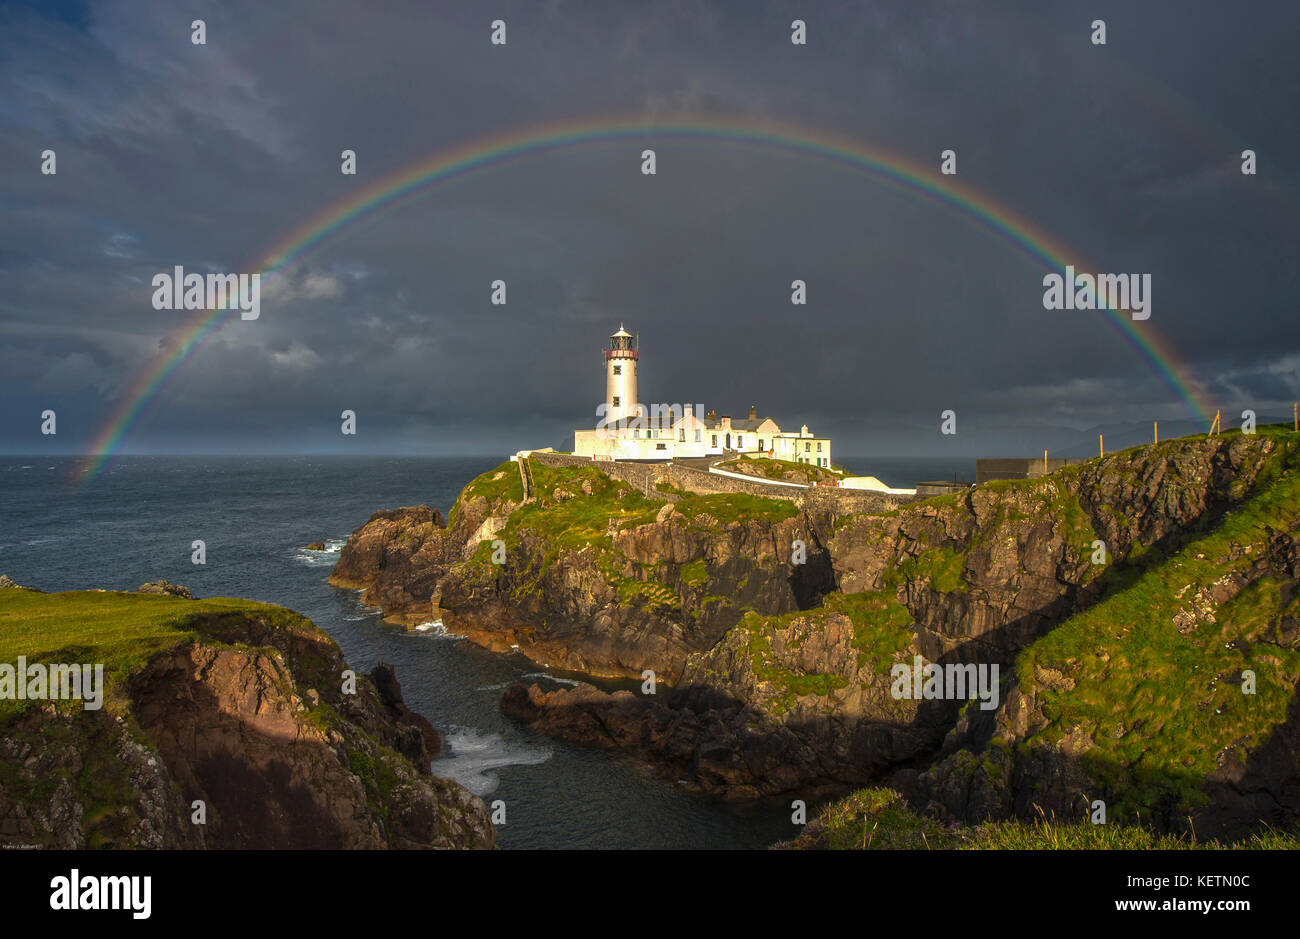 Fanand Head Lighthouse Northern Ireland late afternoon with full rainbow Stock Photo